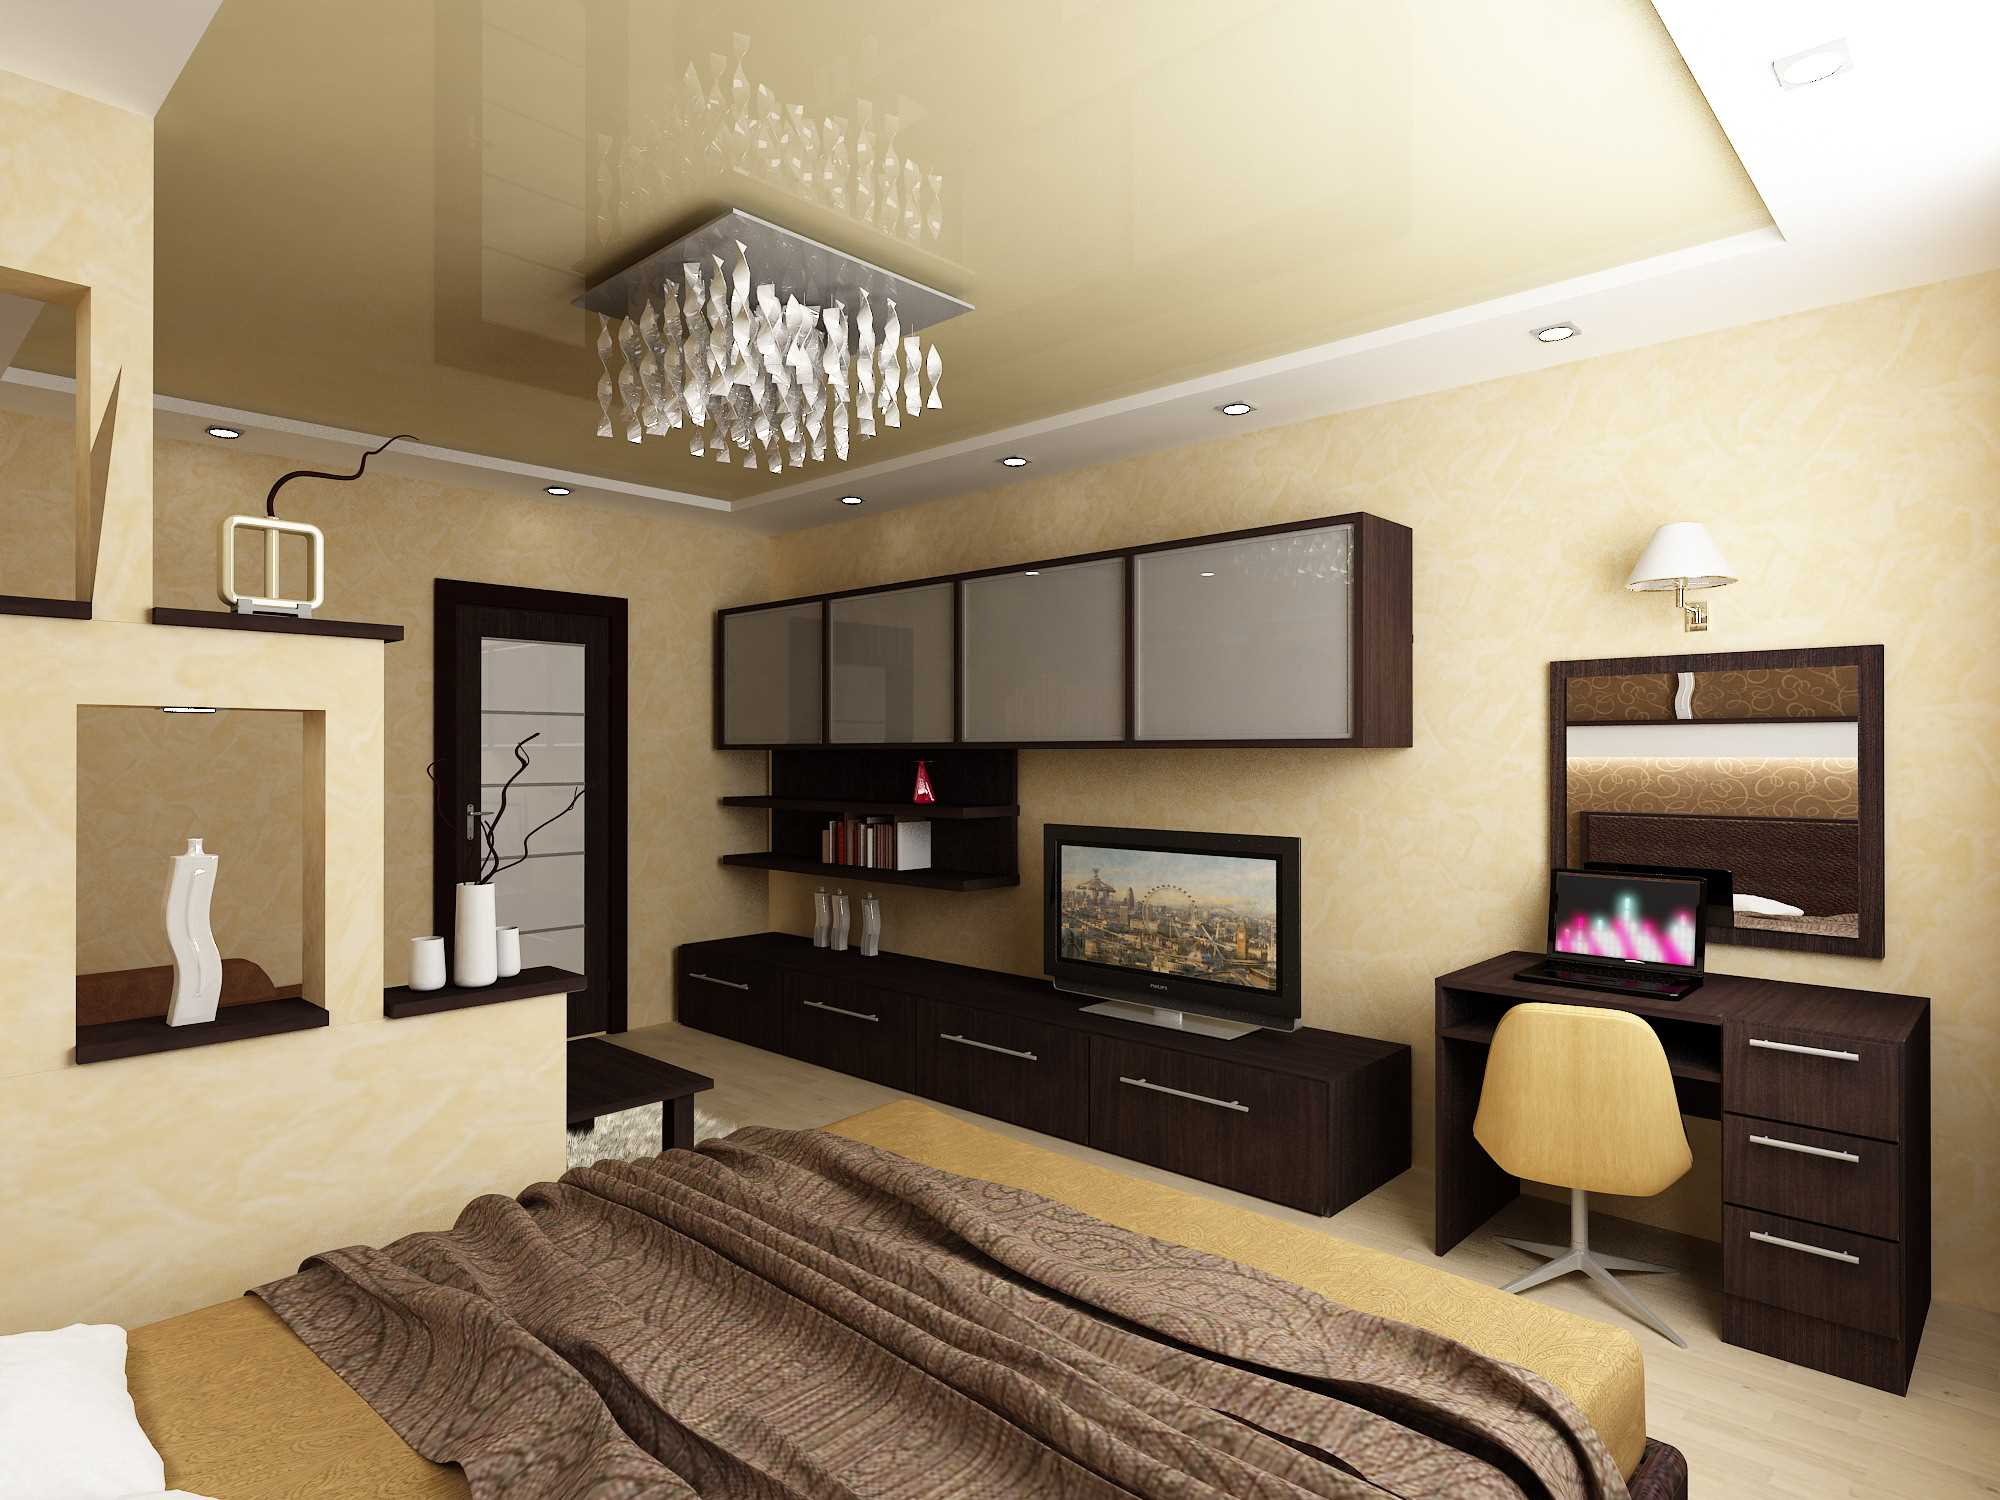 version of the unusual design of the living room bedroom